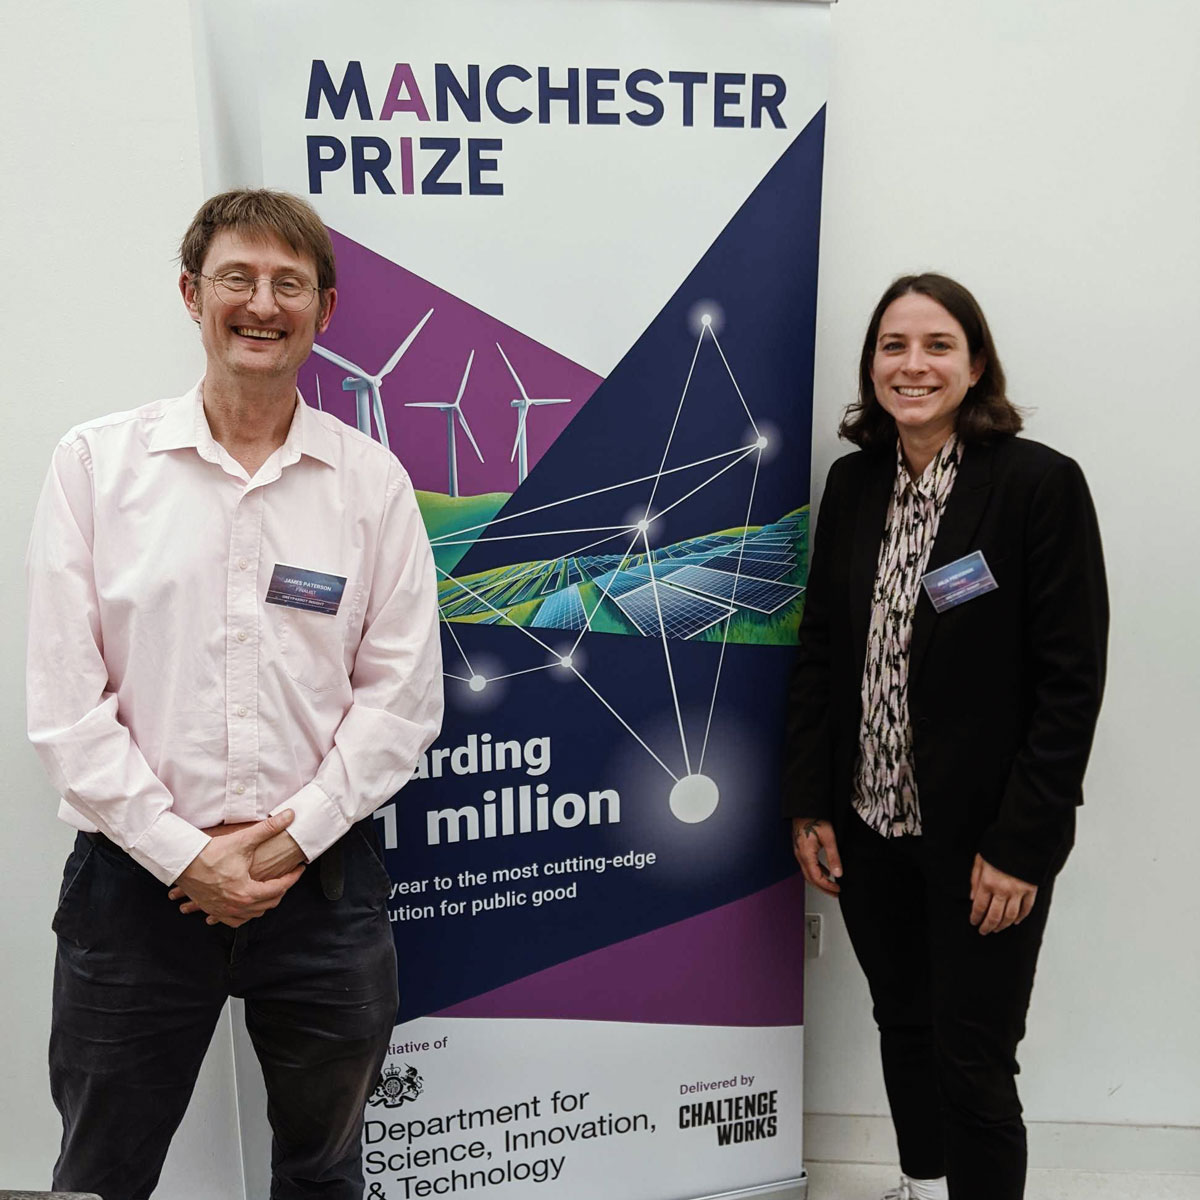 We’re finalists for the first ever #ManchesterPrize! @SciTechGovUK’s new award recognises the UK’s most innovative #AI solution for public good. We’re delighted to be one of 10 finalists. Learn how we use AI to decrease the environmental impact of waste👉 greyparrot.ai/about-us